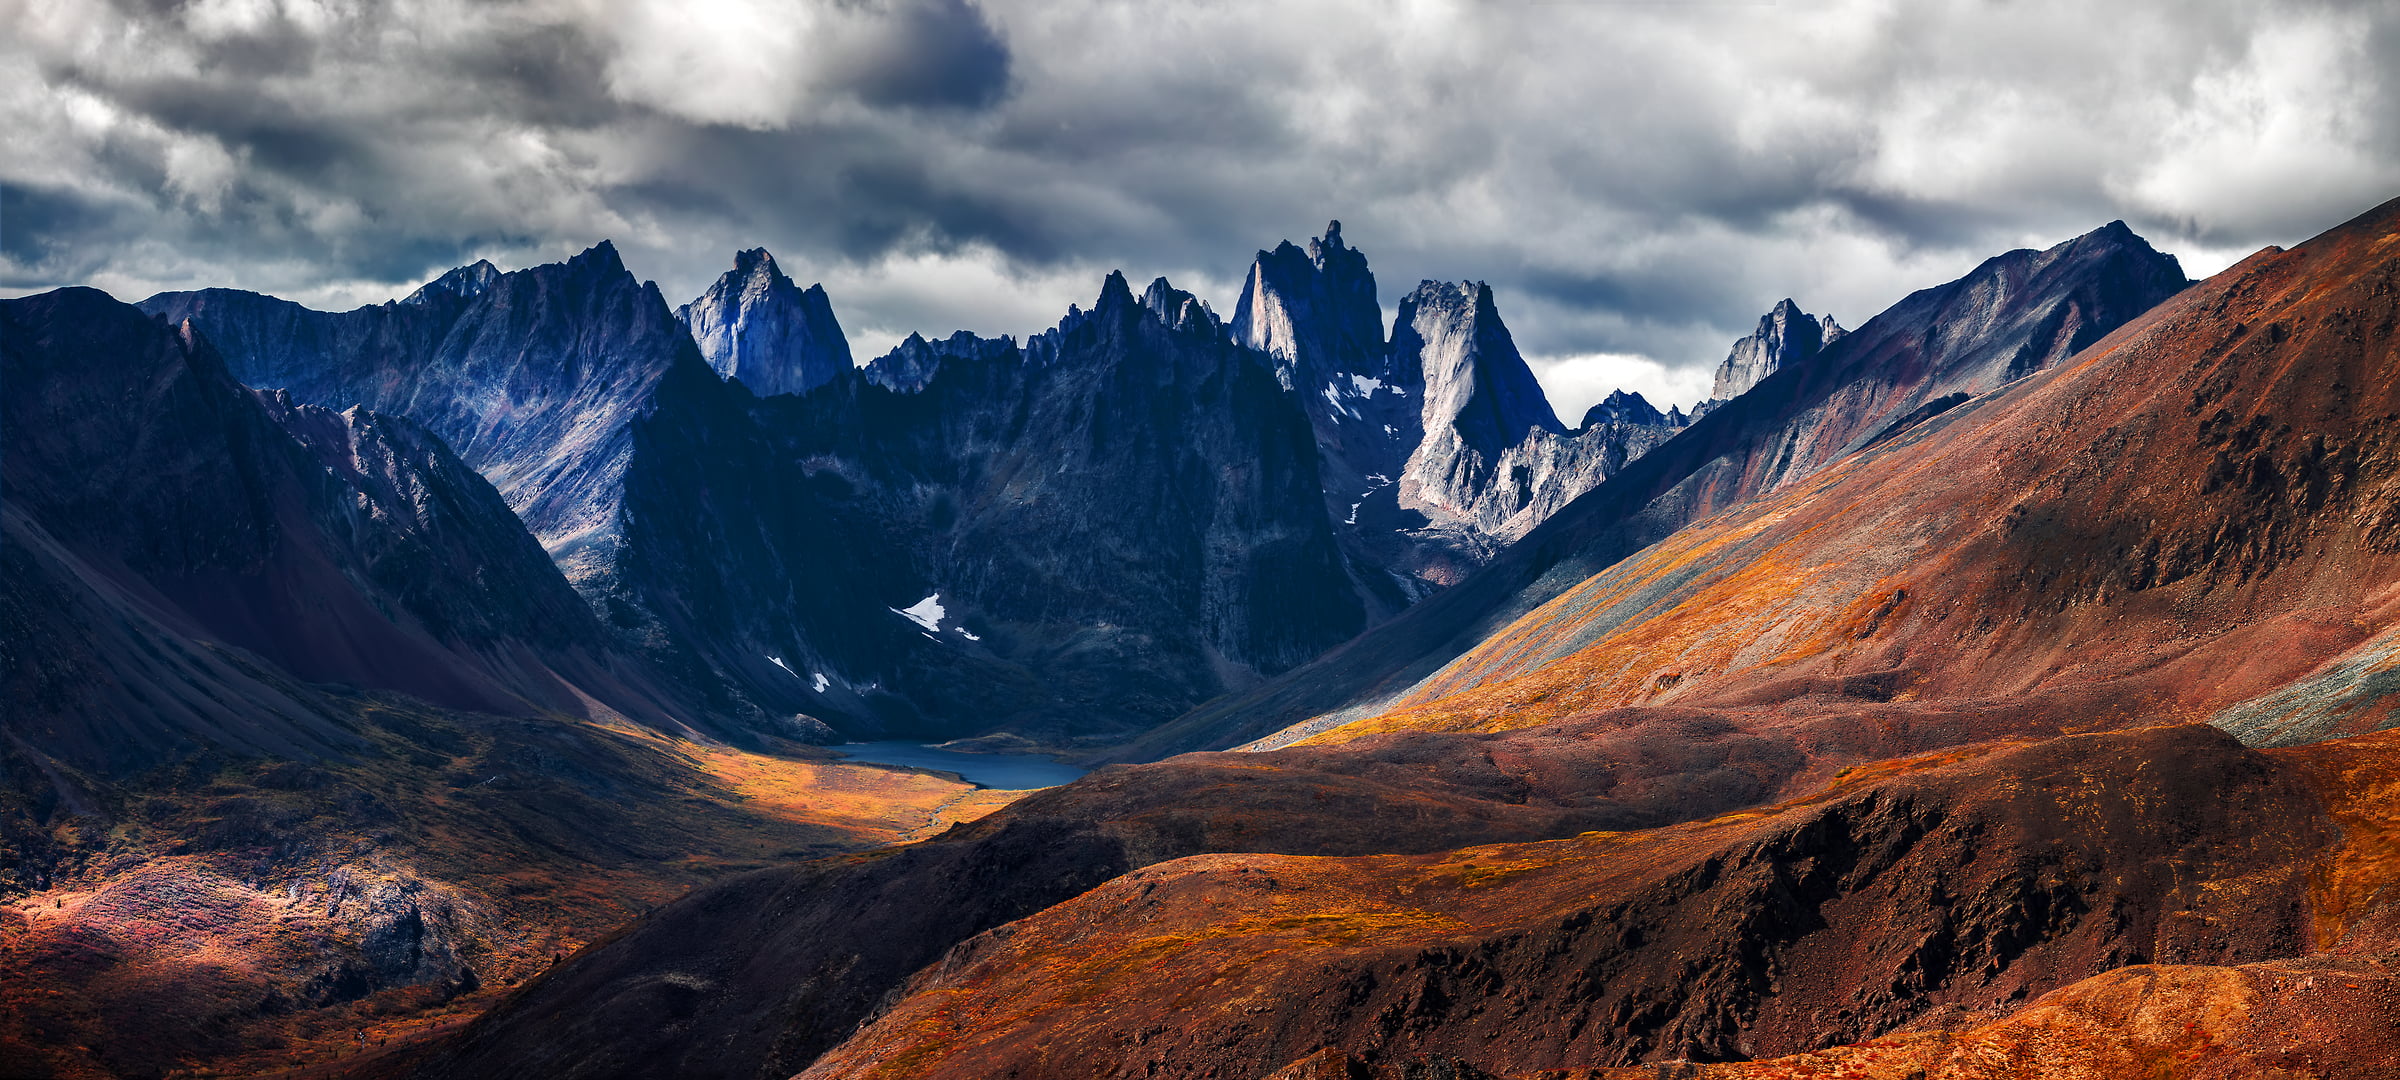 209 megapixels! A very high resolution, large-format VAST photo print of a remote landscape; photograph created by Chris Collacott in Tombstone Territorial Park, Yukon, Canada.